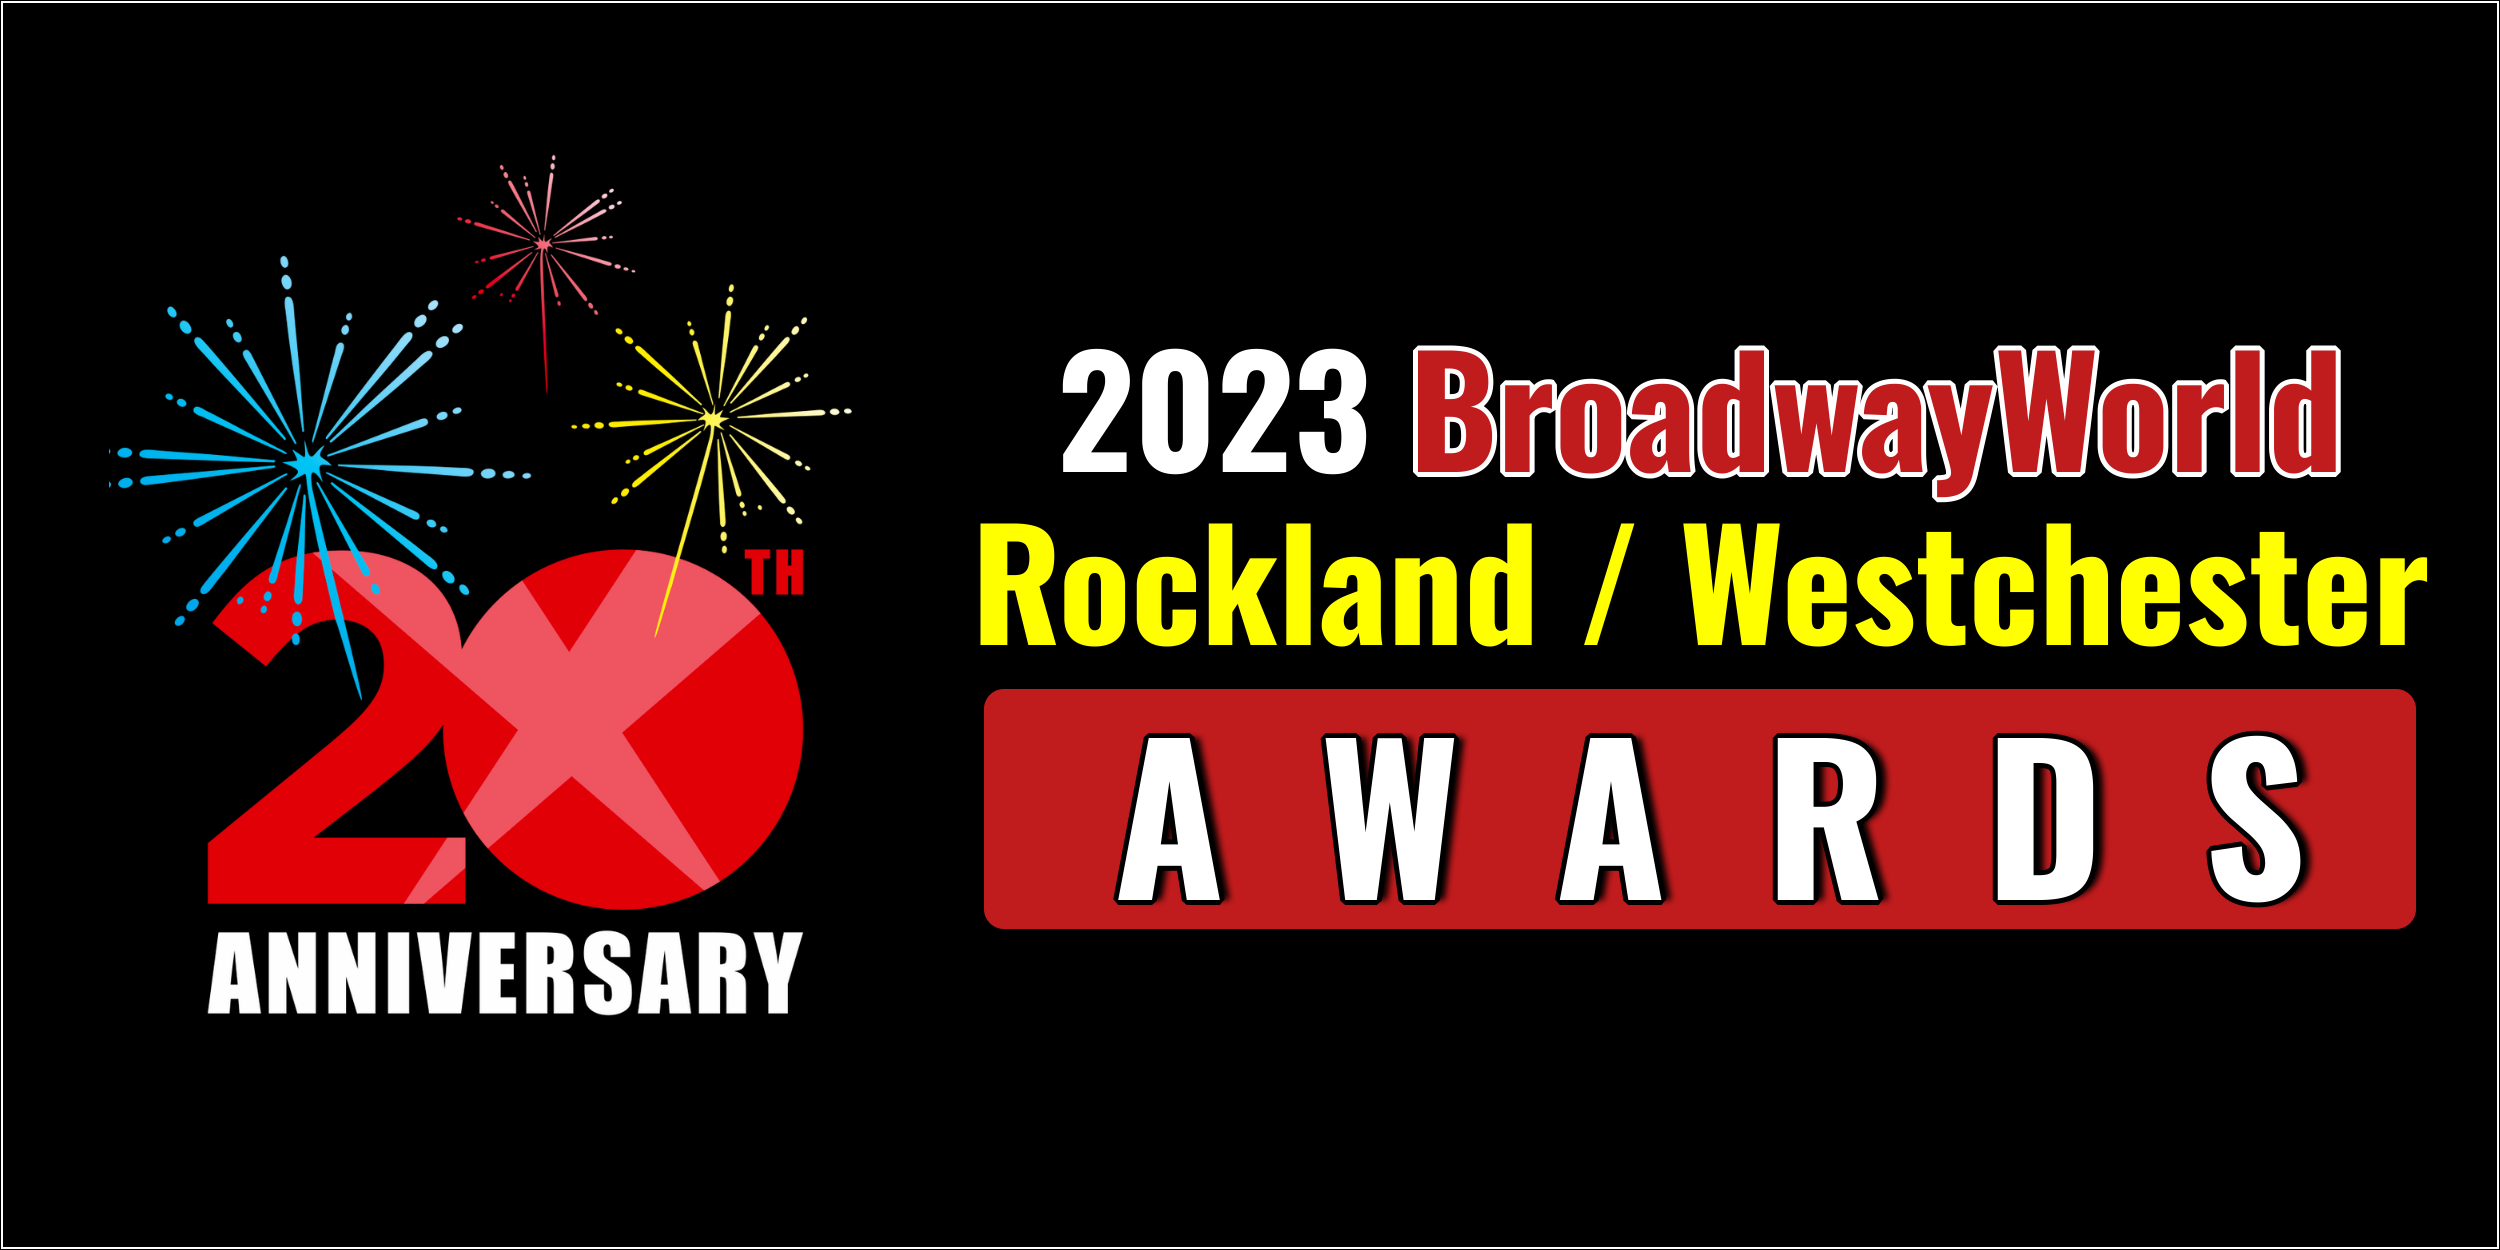 Latest Standings Announced For The 2023 BroadwayWorld Rockland / Westchester Awards; SEUSS Photo